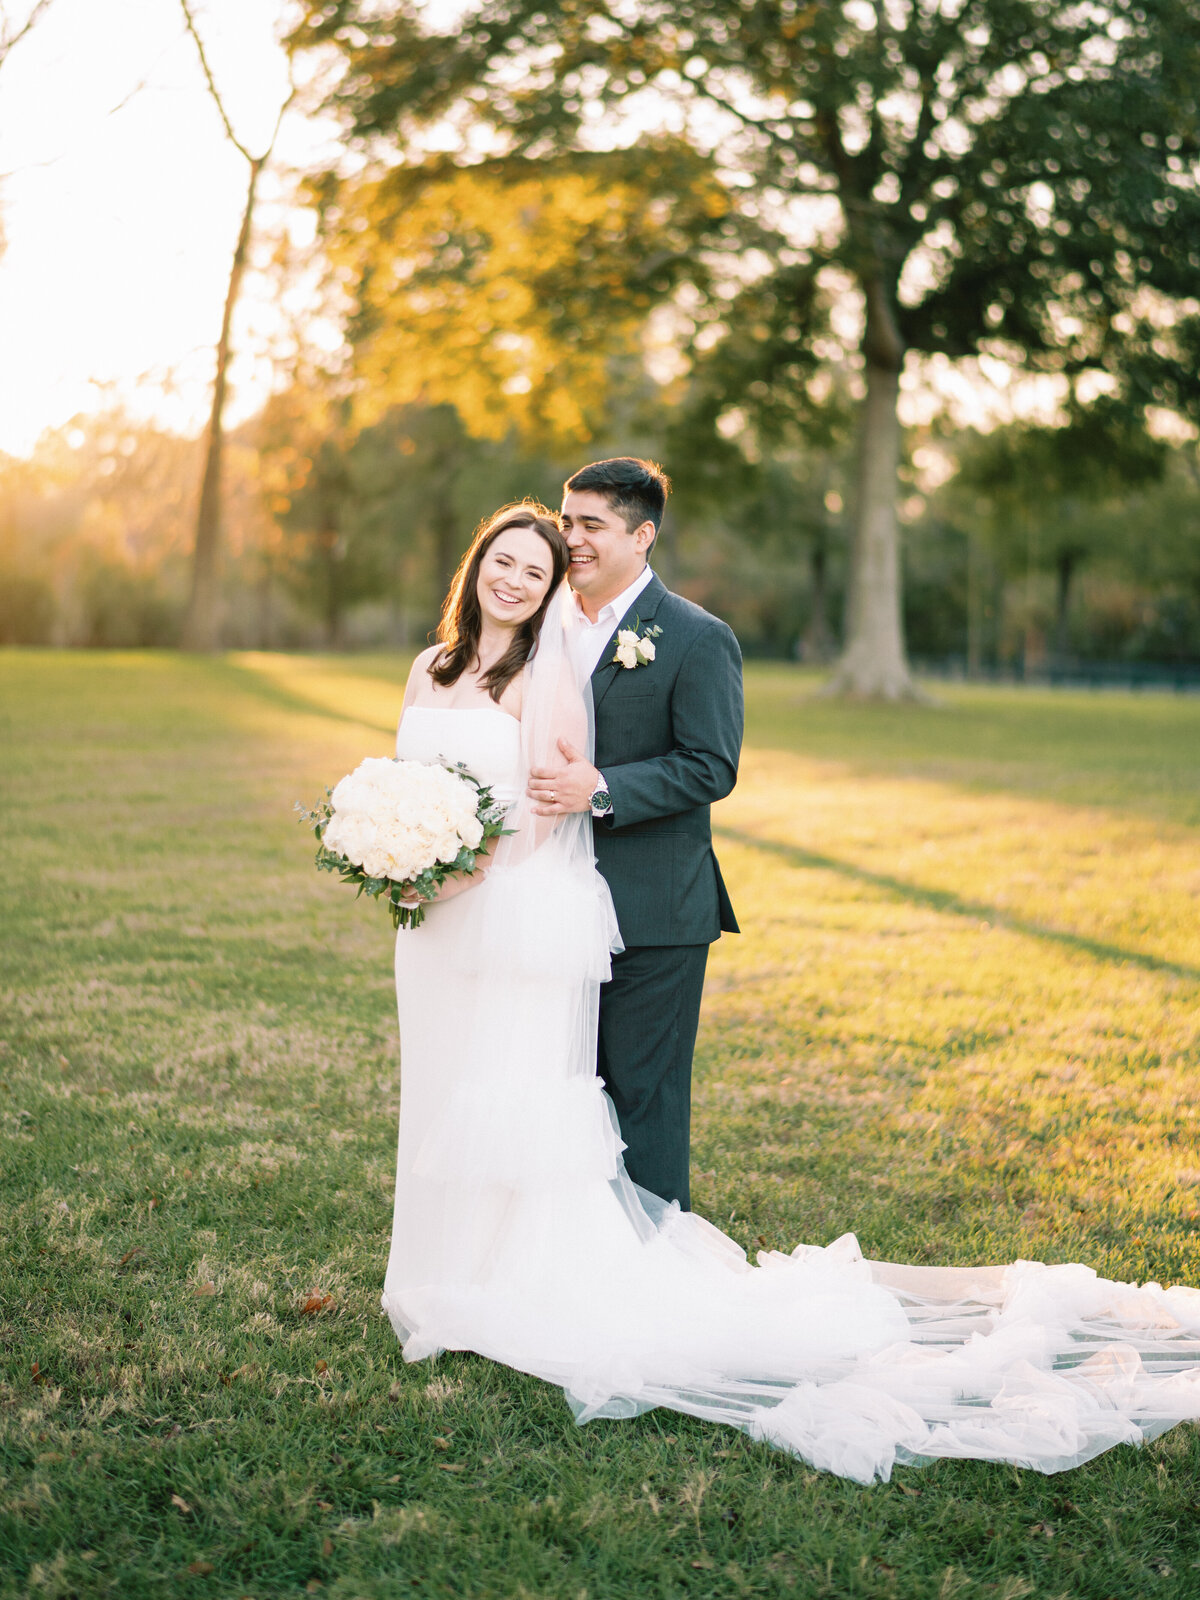 Shelby Day Photography. Wedding Film Photographer in Houston & Austin, Texas. A Seamless Blend of Editorial Imagery & Candid Authenticity, Each Image Tells Your Unique Love Story. Book Now.